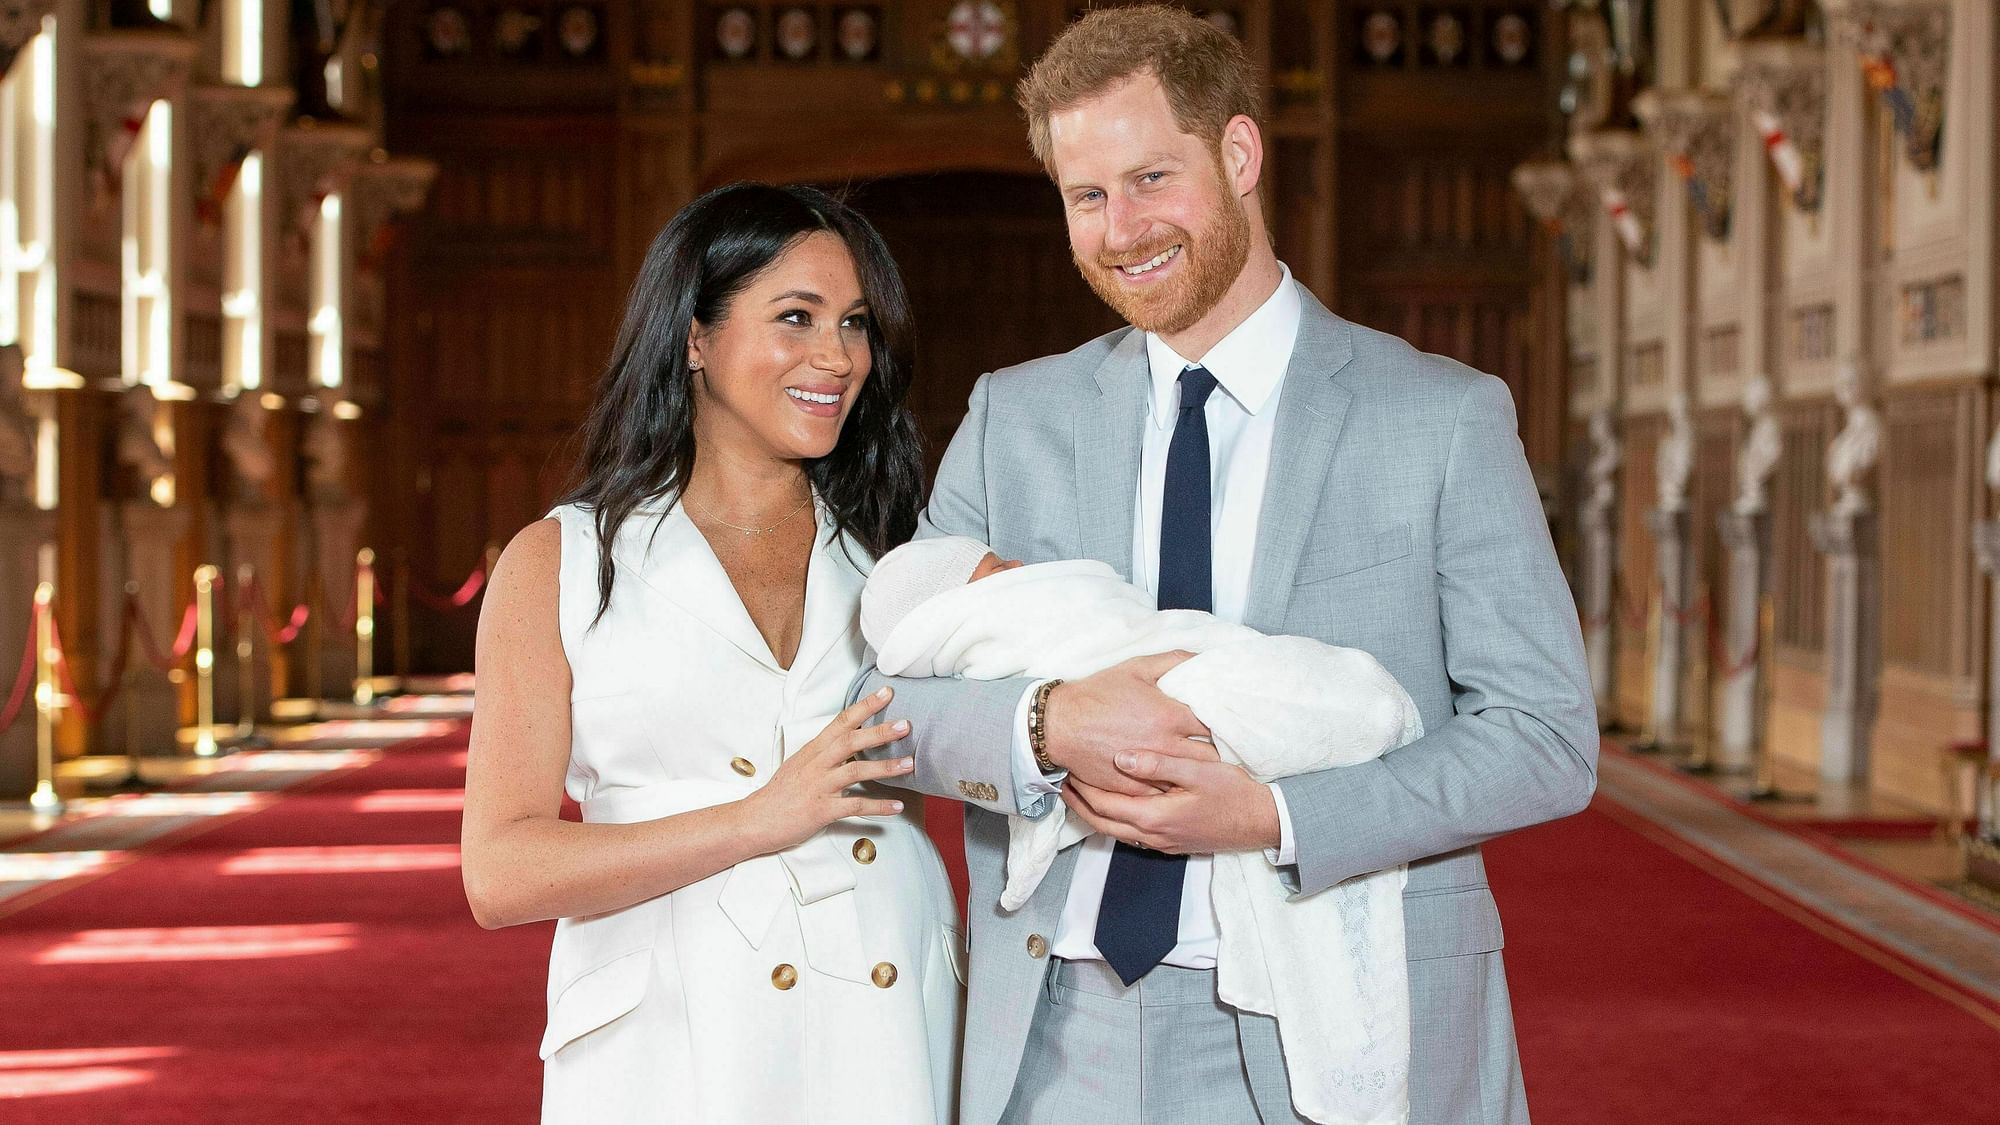 Meghan Markle and Prince Harry, the respective Duchess and Duke of Sussex, became parents on 6 May 2019.